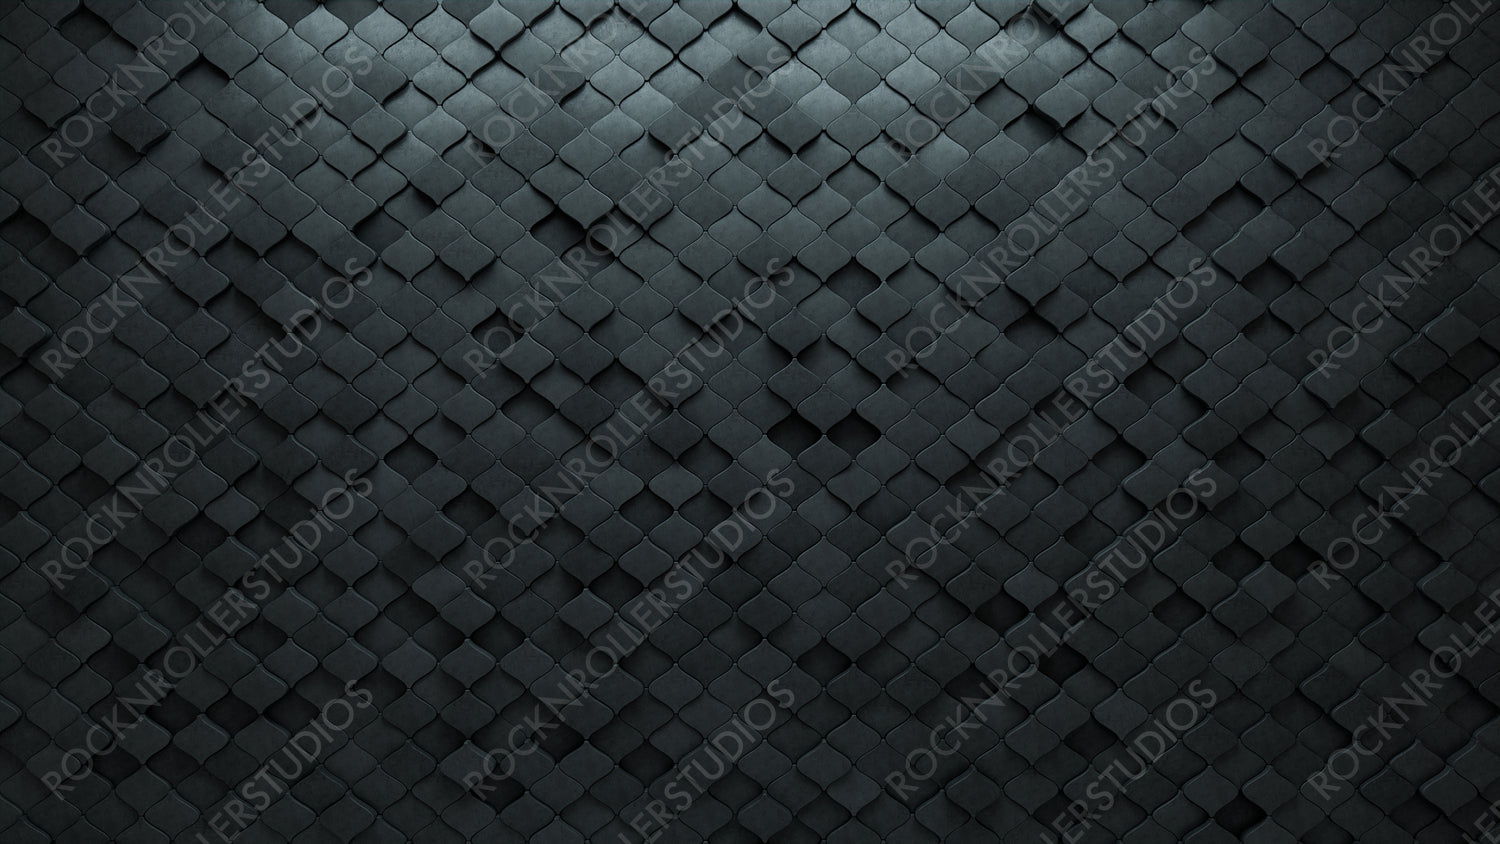 3D, Futuristic Wall background with tiles. Concrete, tile Wallpaper with Arabesque, Polished blocks. 3D Render